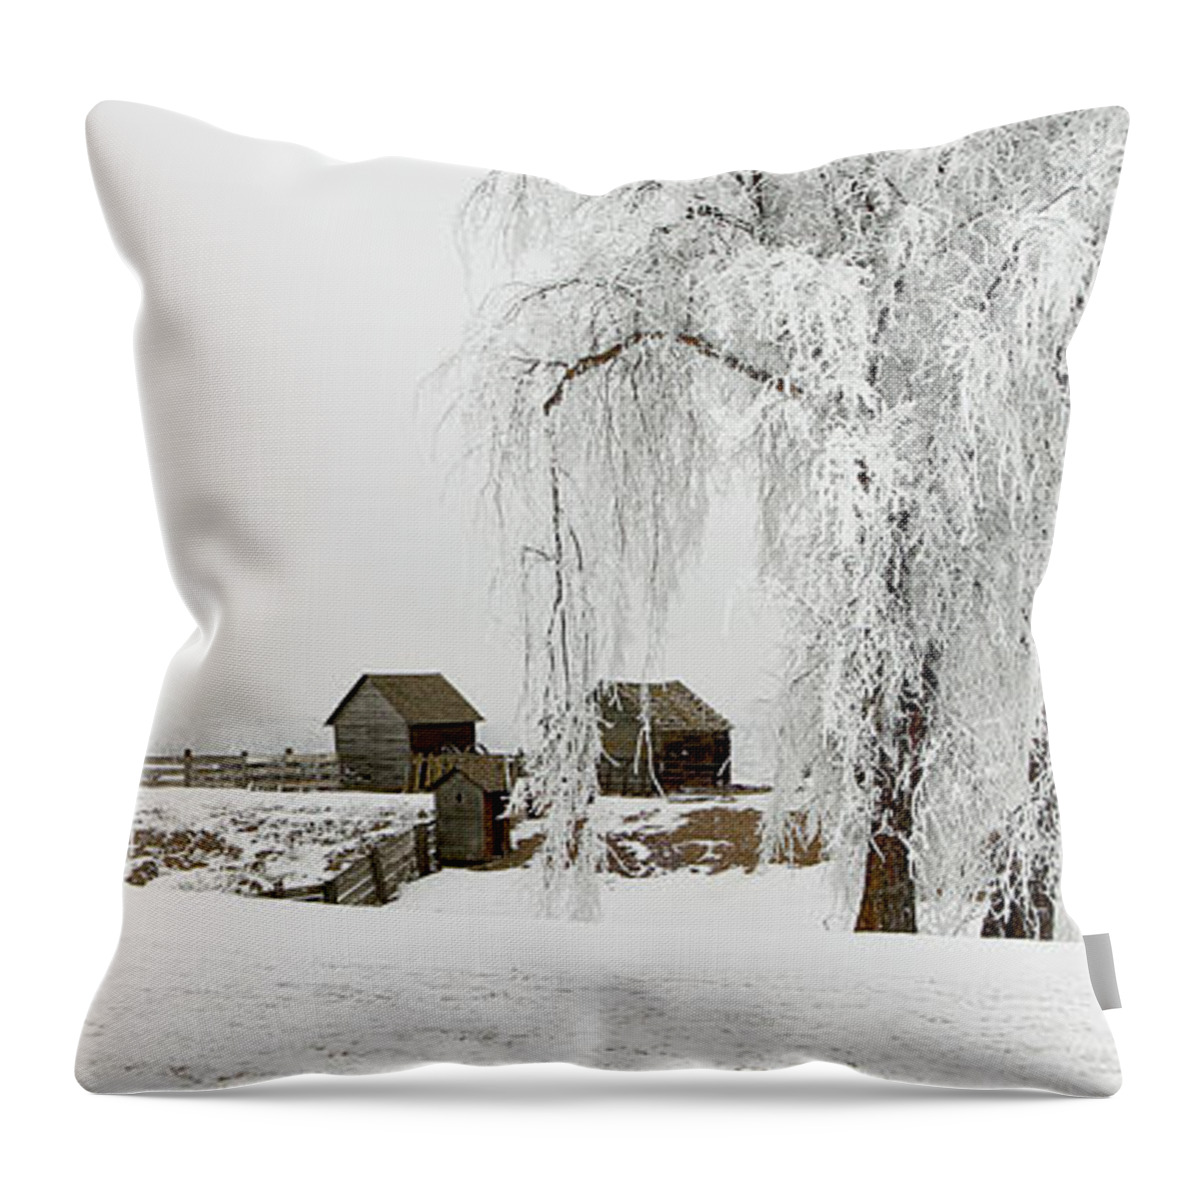 Hoar Throw Pillow featuring the photograph Winter Farm by Mary Jo Allen